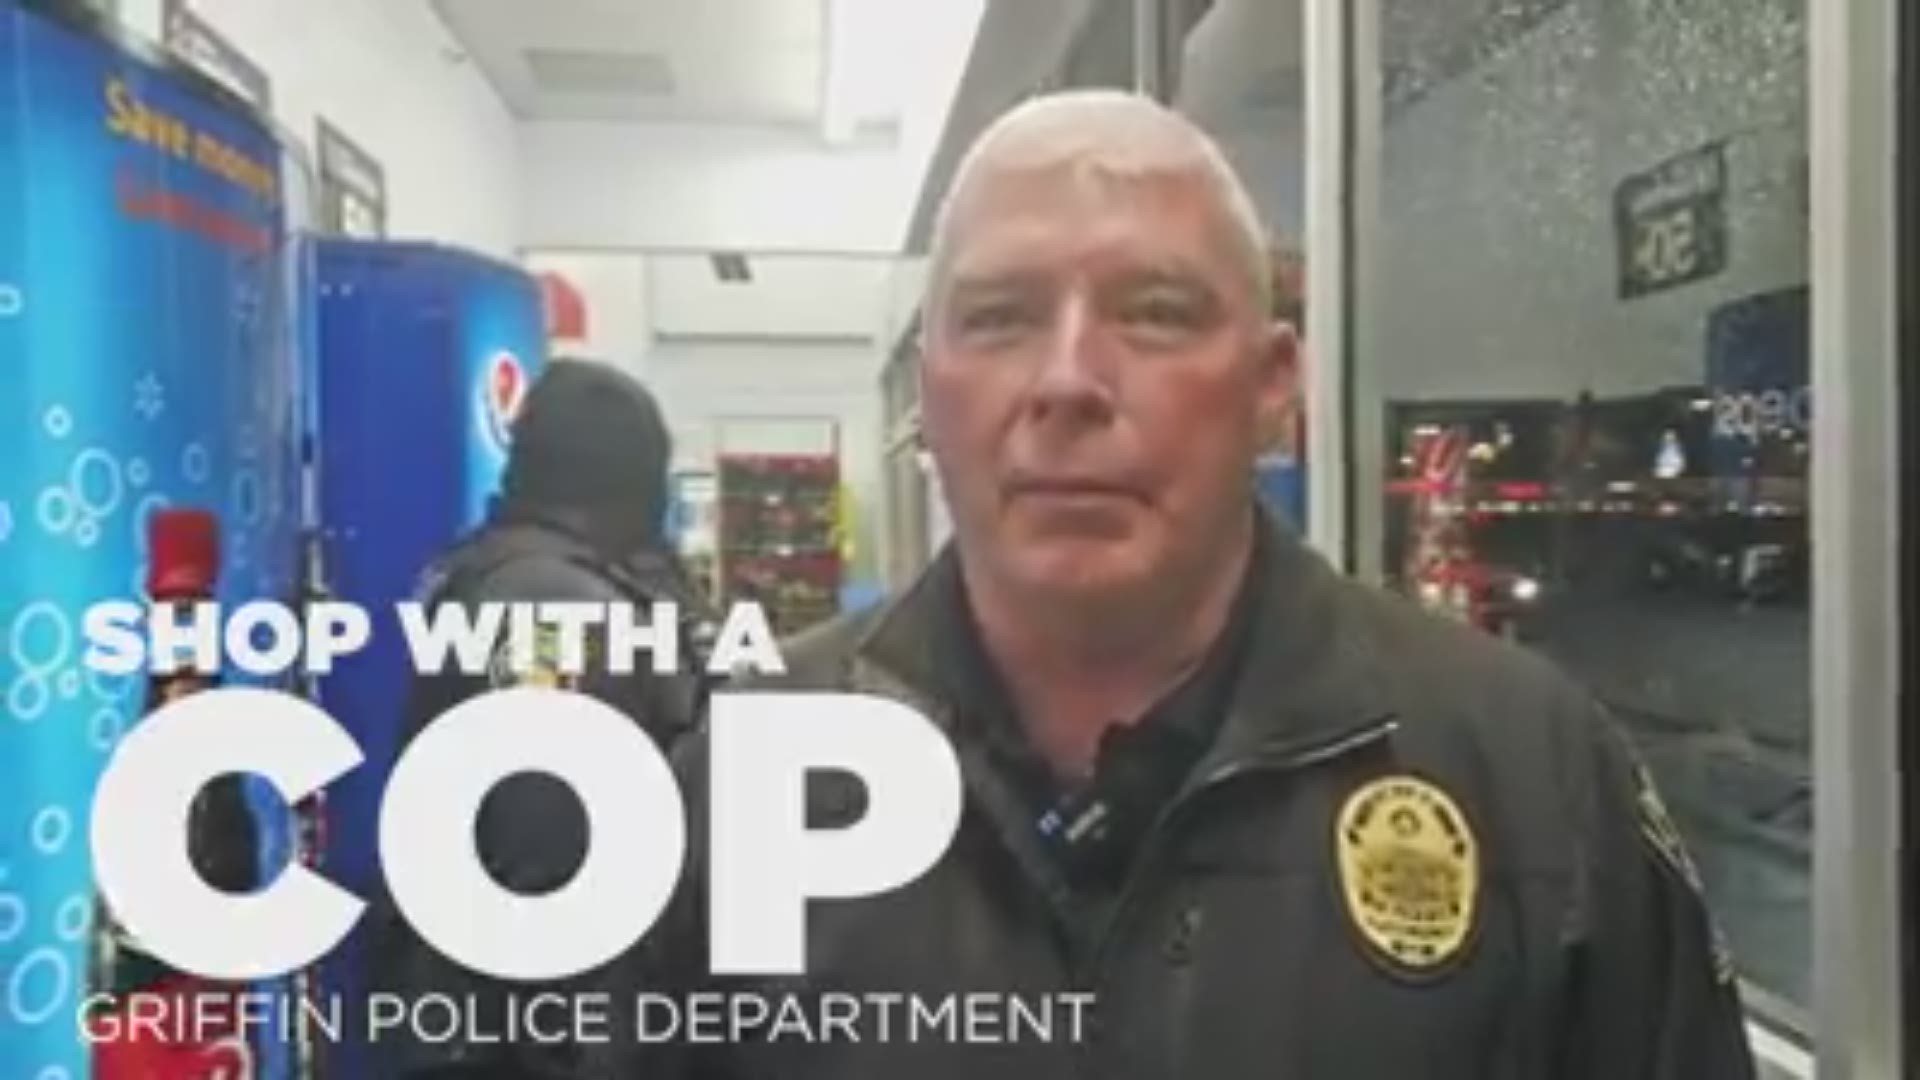 The Griffin Police Department held its annual Shop With A Cop event last Thursday evening with the help of the Kiwanis Club of Griffin and many other donors.